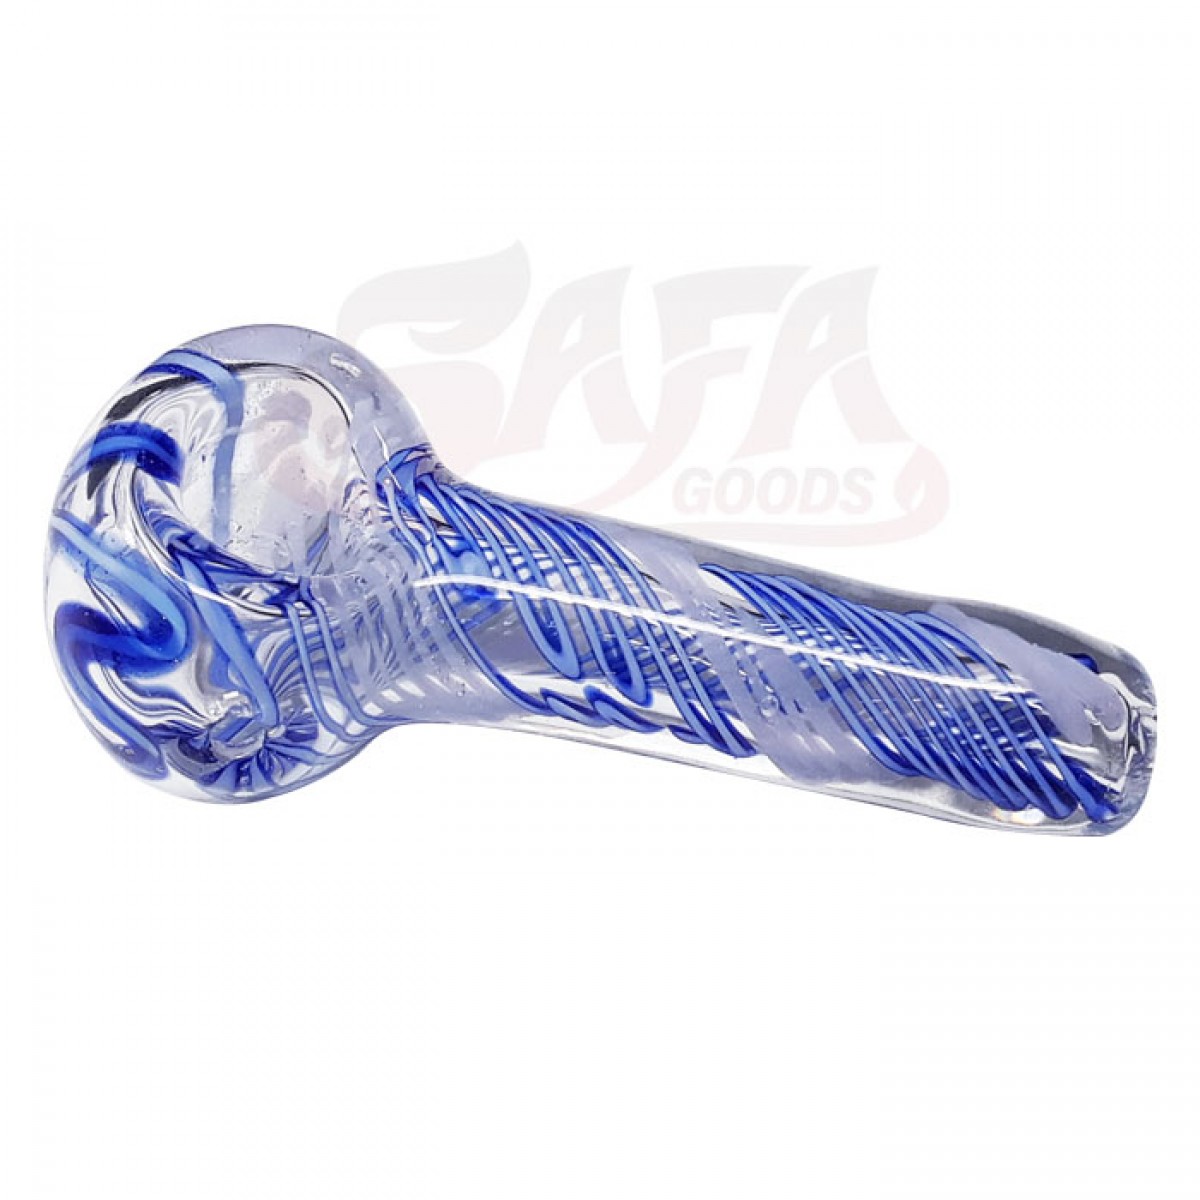 4 Inch Glass Hand Pipes - Multicolor Linework